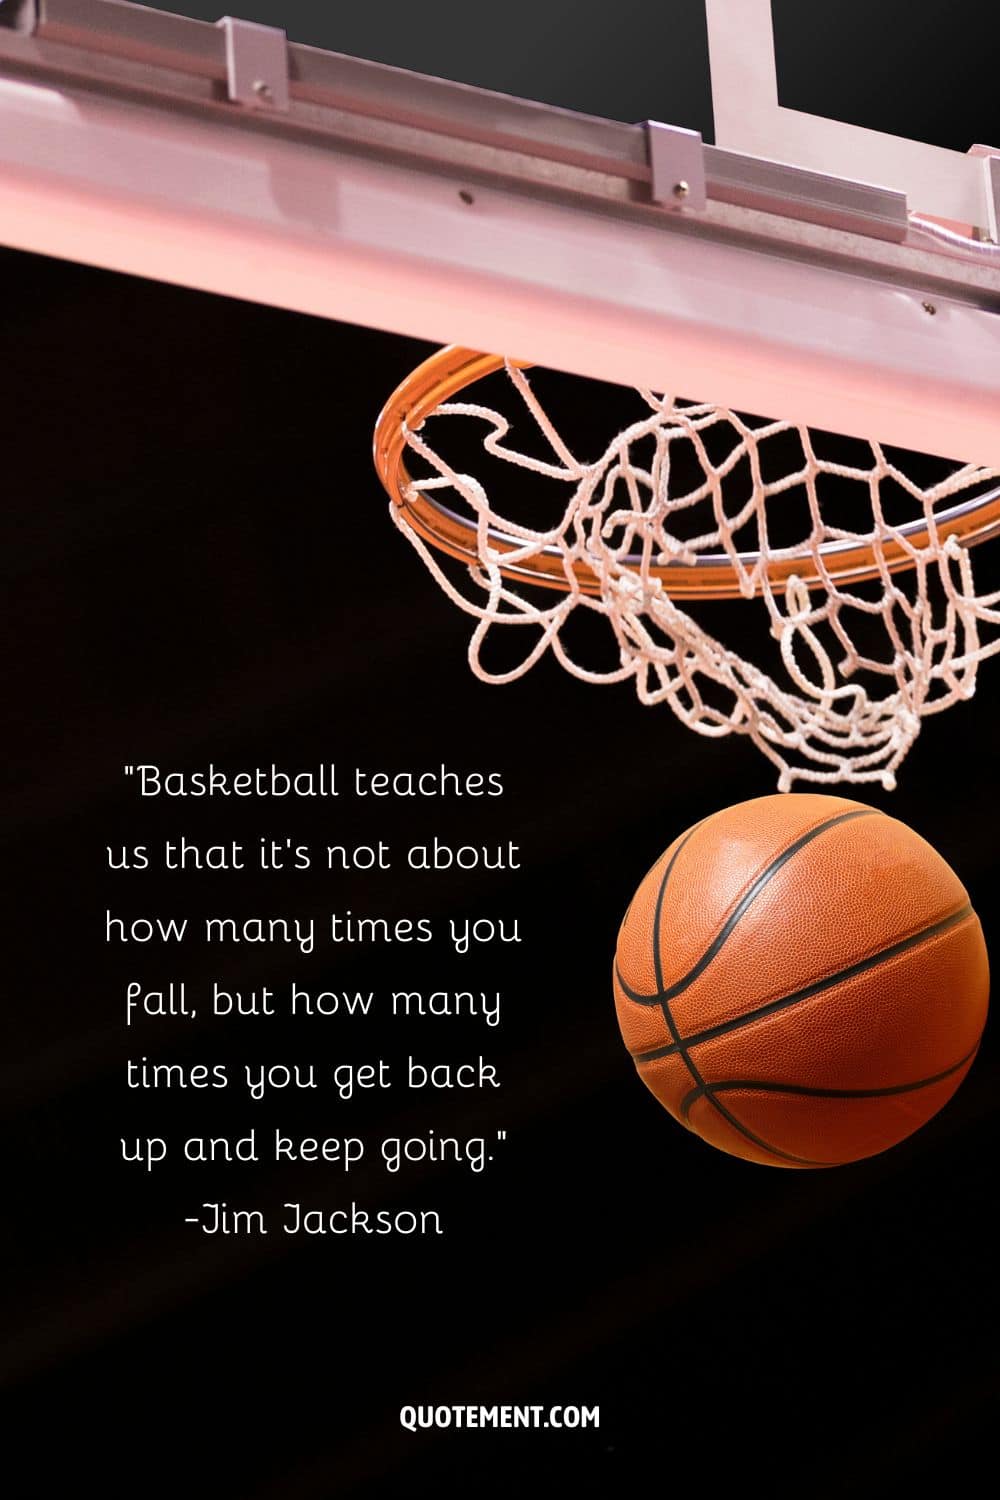 Basketball teaches us that it's not about how many times you fall, but how many times you get back up and keep going